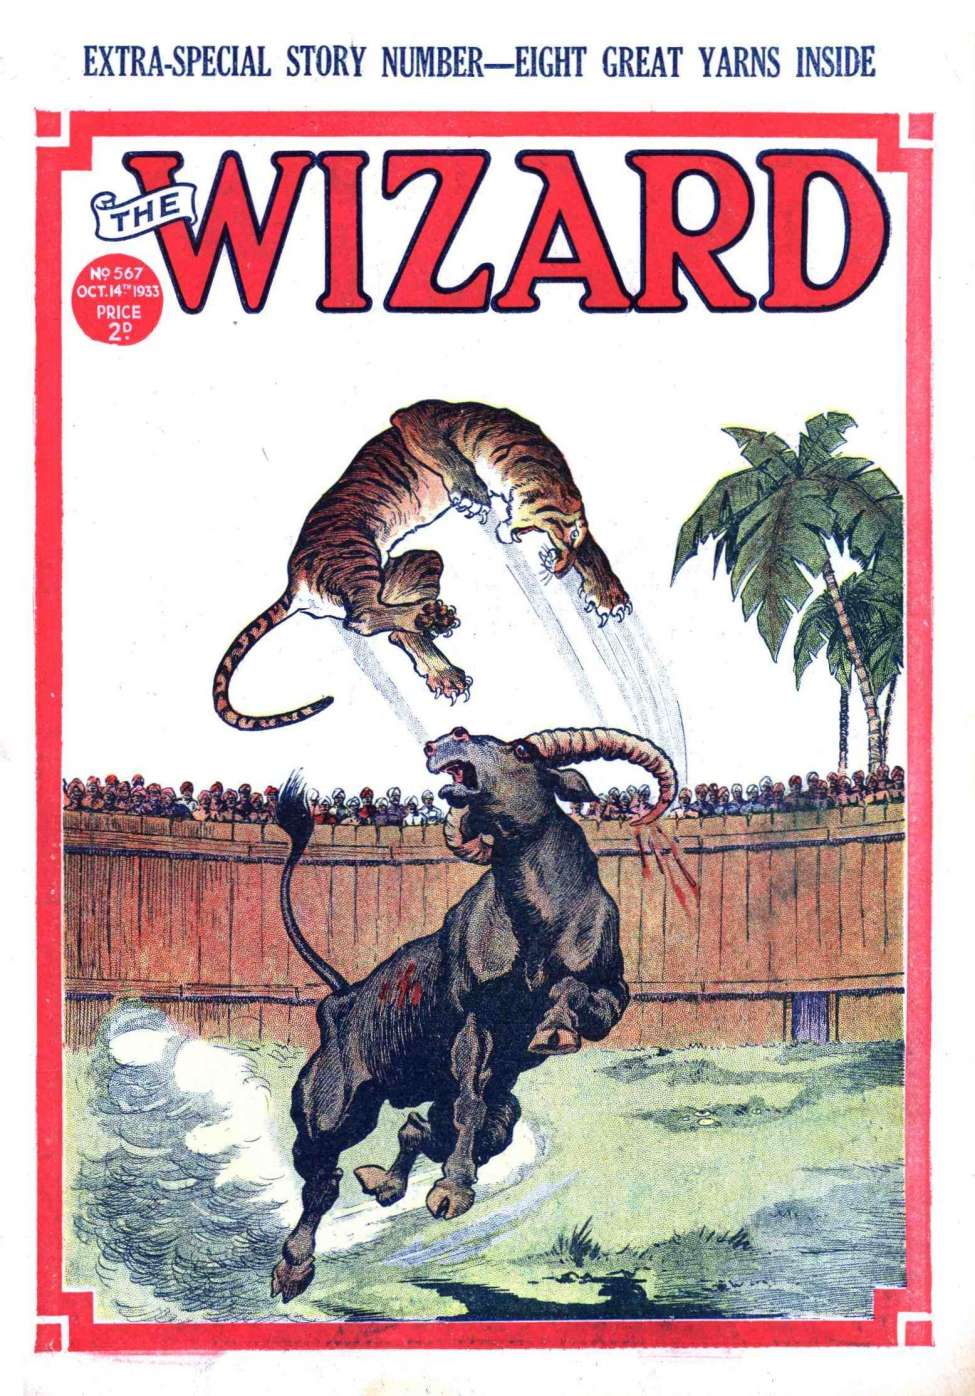 Comic Book Cover For The Wizard 567